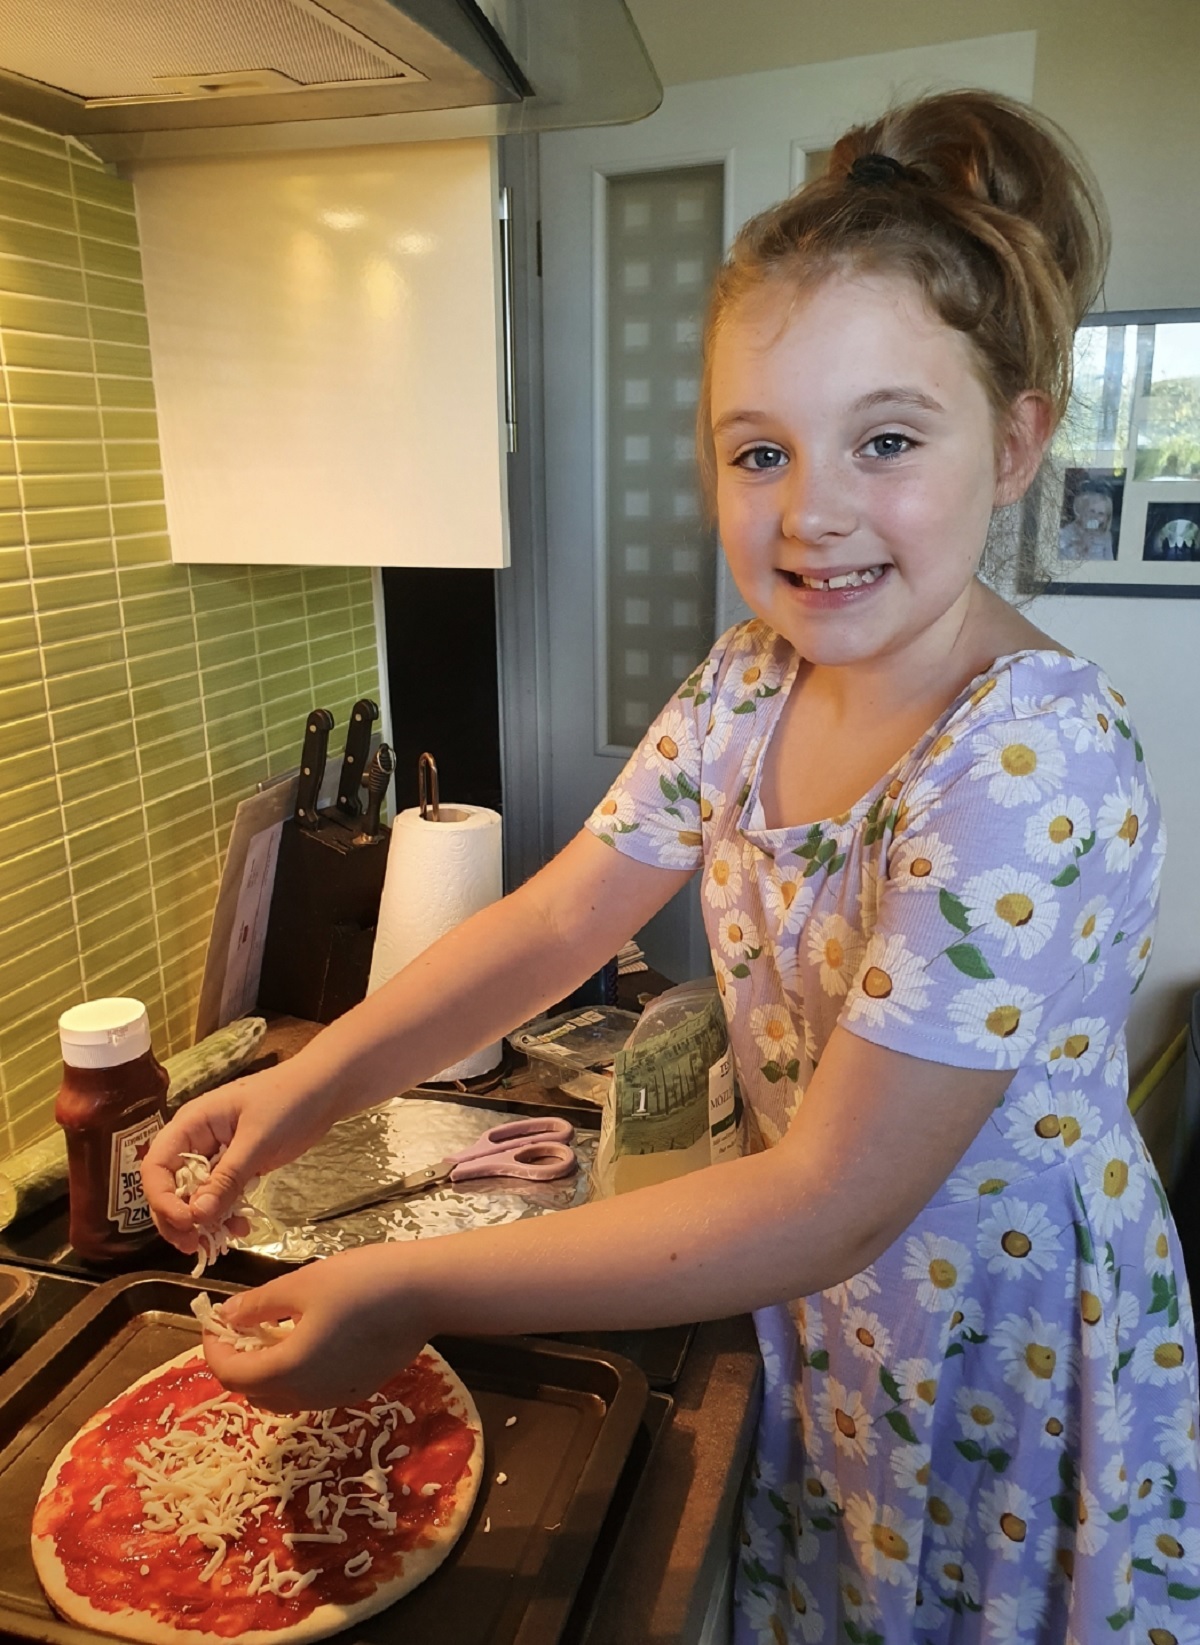 Pizza the action - Poppy cooks up something special